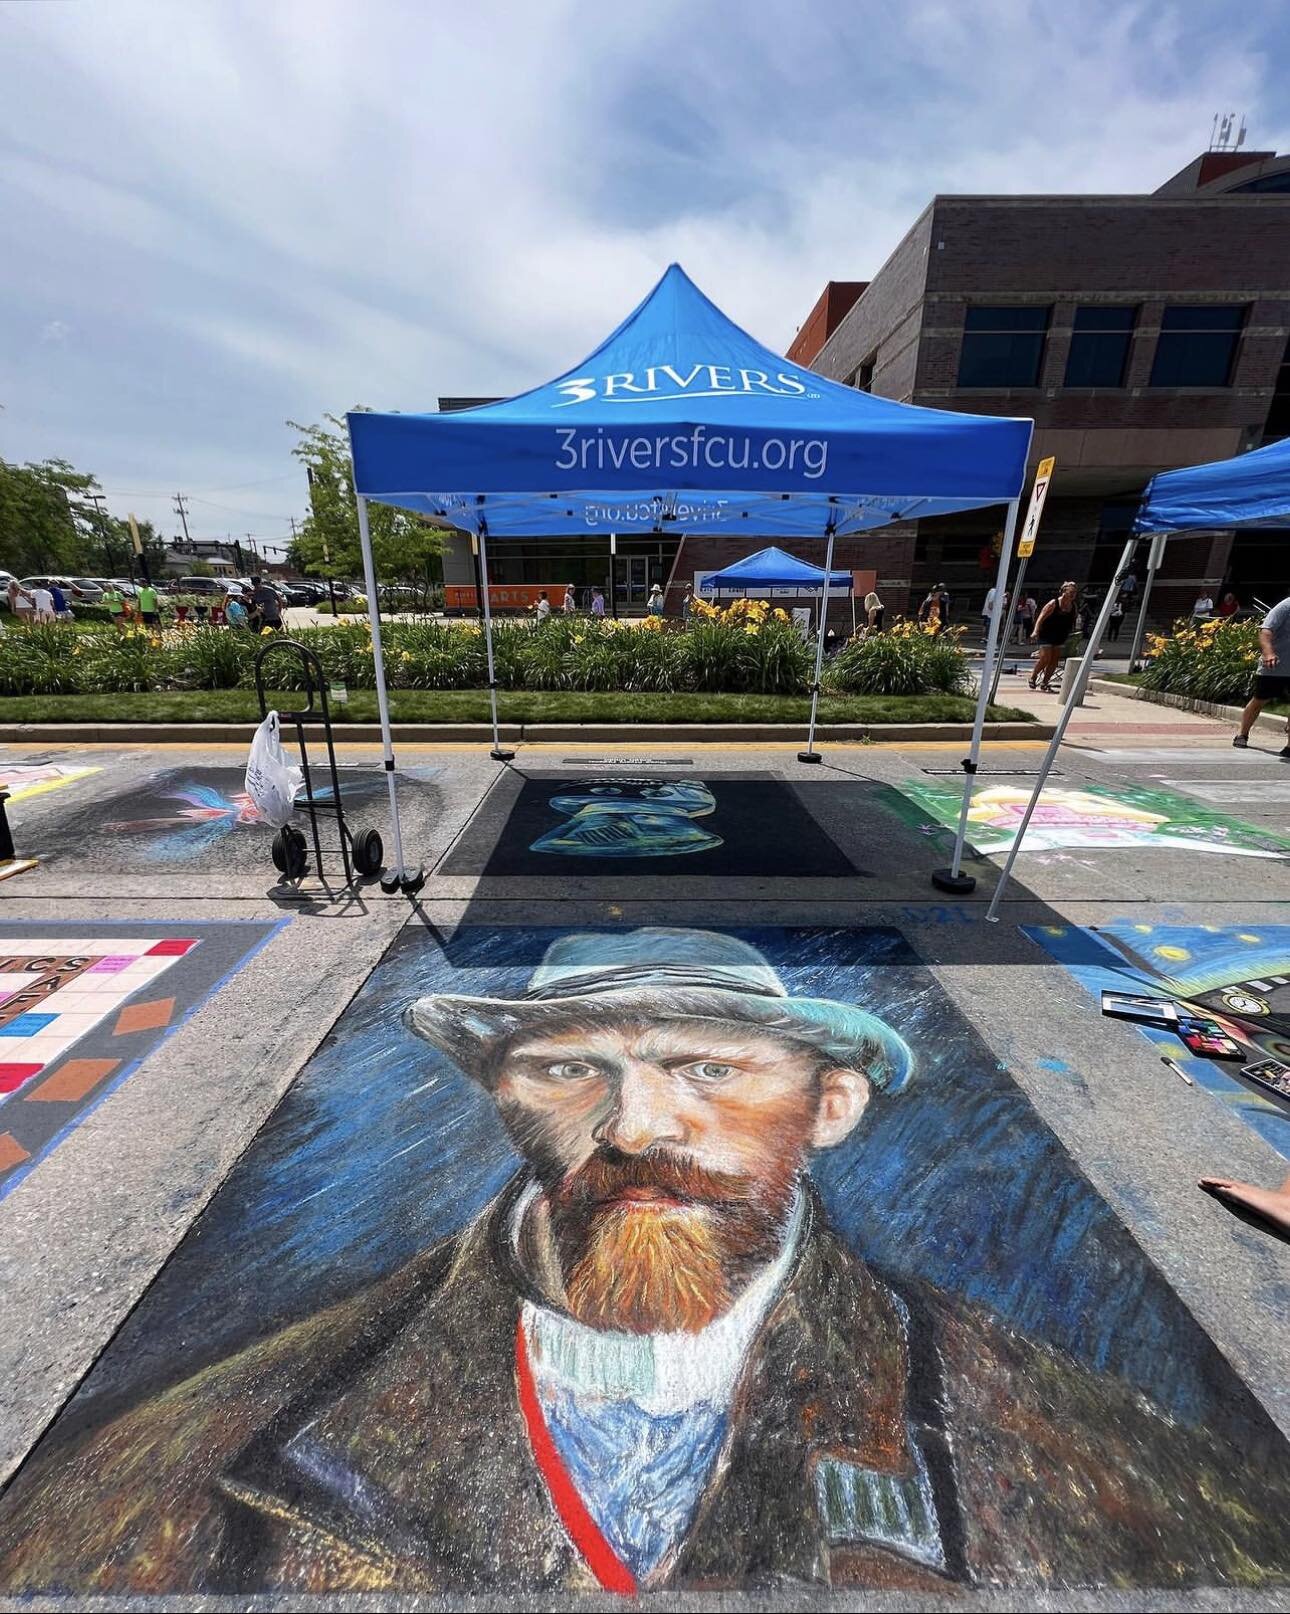 Each year, it is FWMoA’s goal to draw the city’s most creative citizens together to contribute to the largest community art project in the region, attracting families, friends, and supporters of a vibrant cultural life in Fort Wayne.